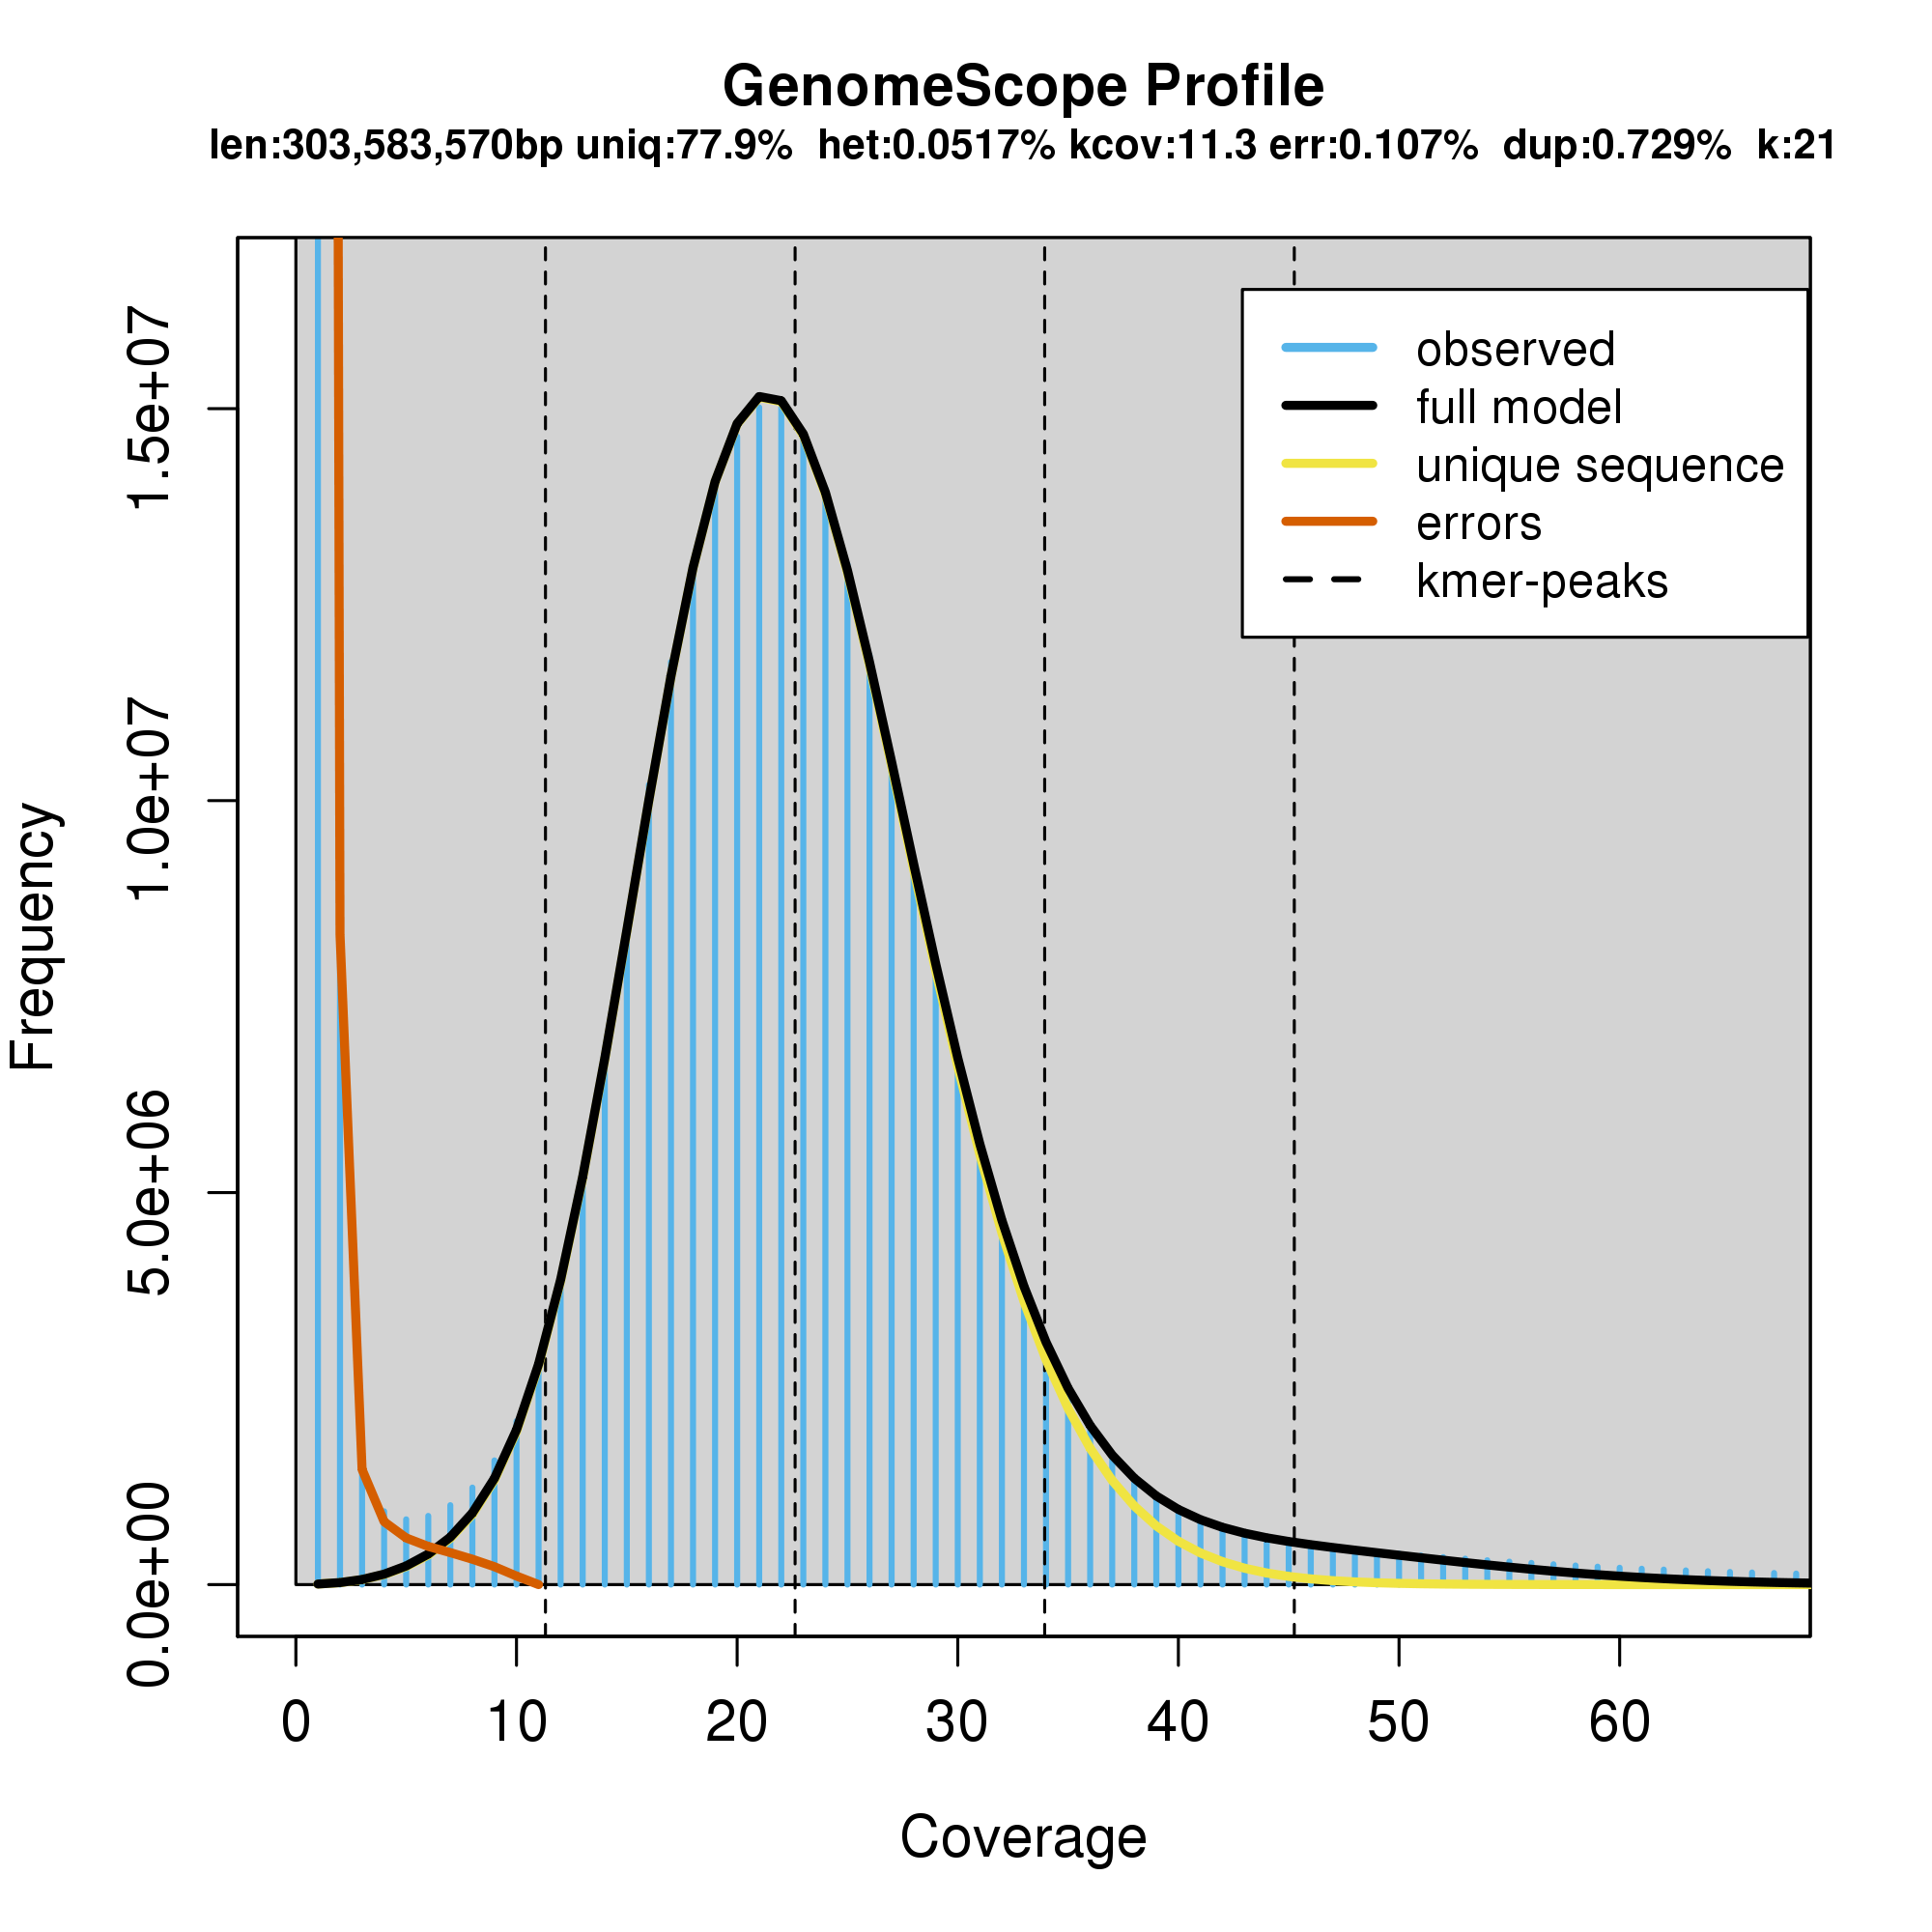 Output of the GenomeScope analysis.